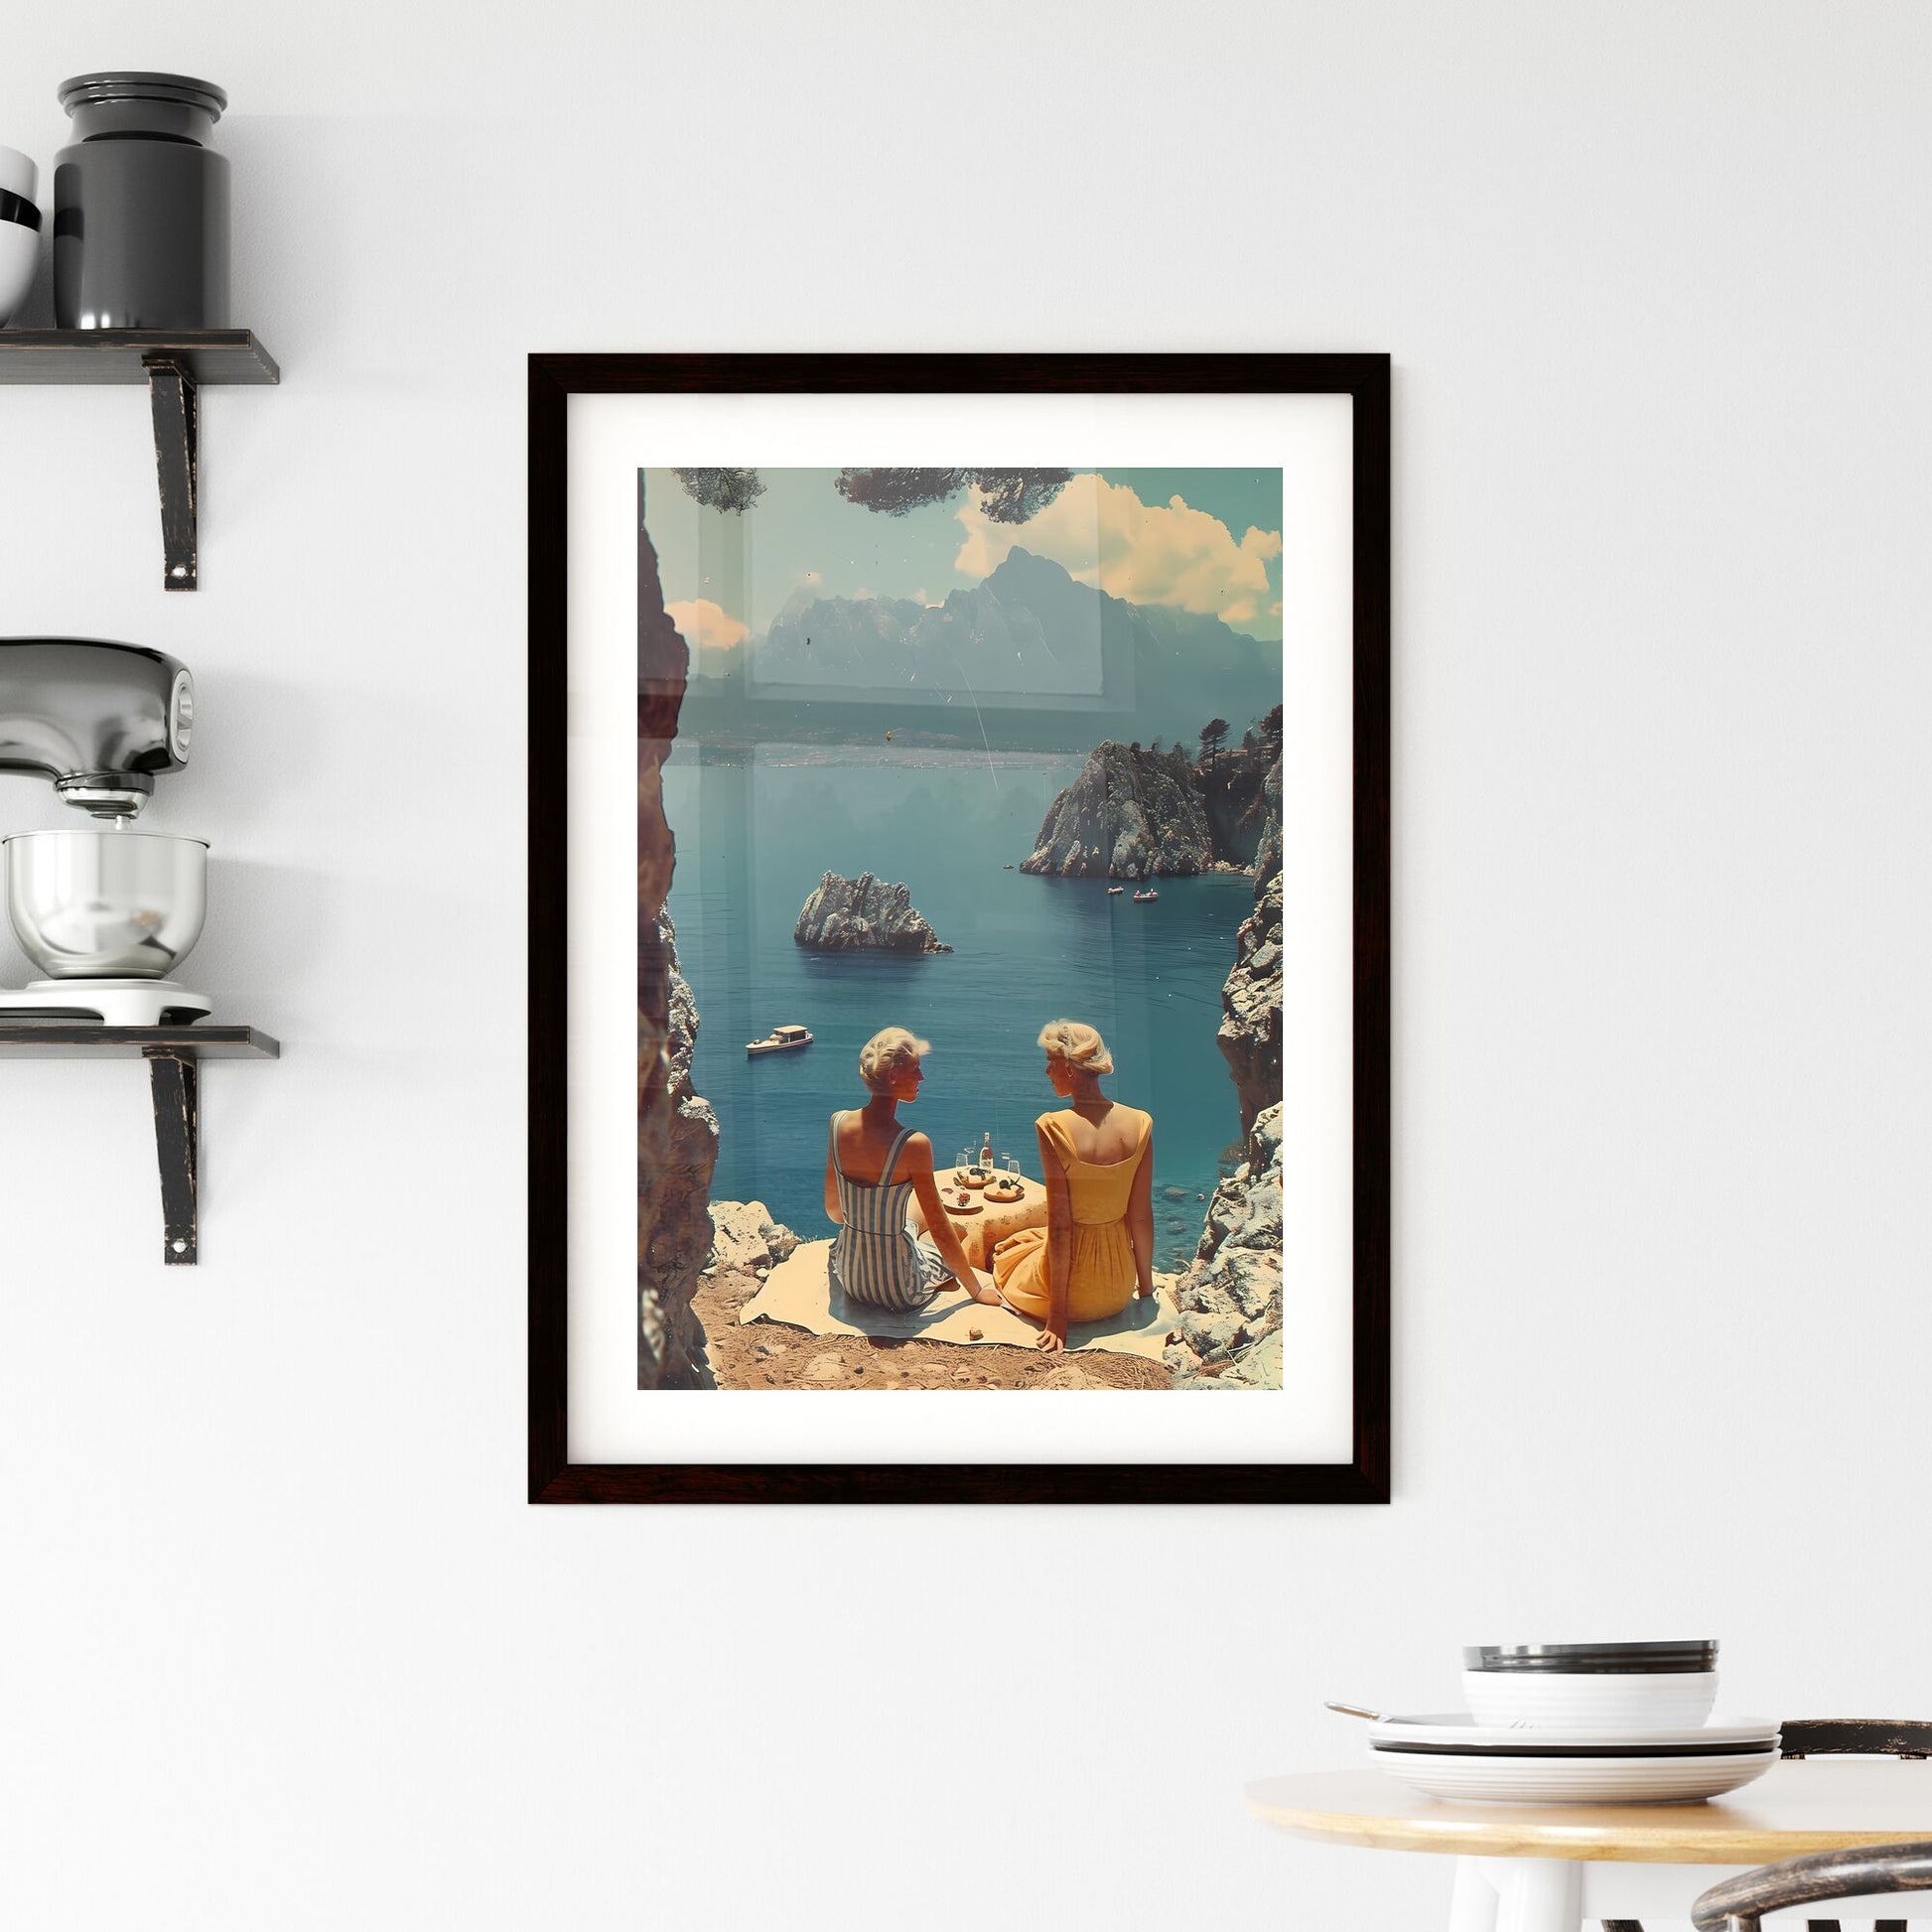 A landscape of the German countryside - Art print of two women sitting at a table overlooking a body of water Default Title